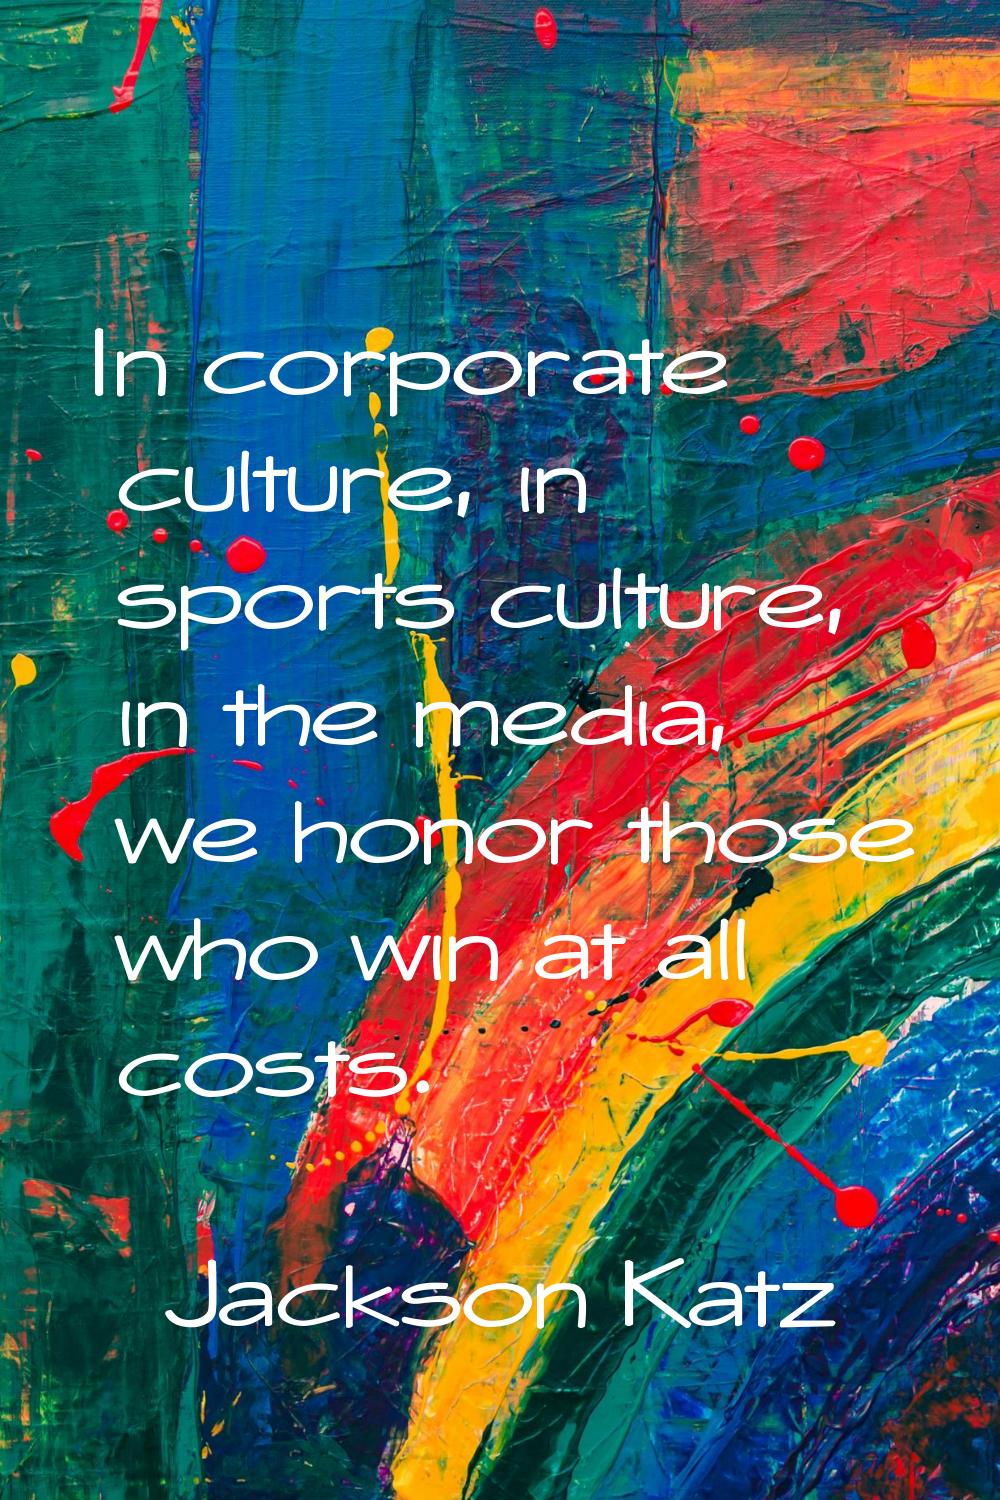 In corporate culture, in sports culture, in the media, we honor those who win at all costs.